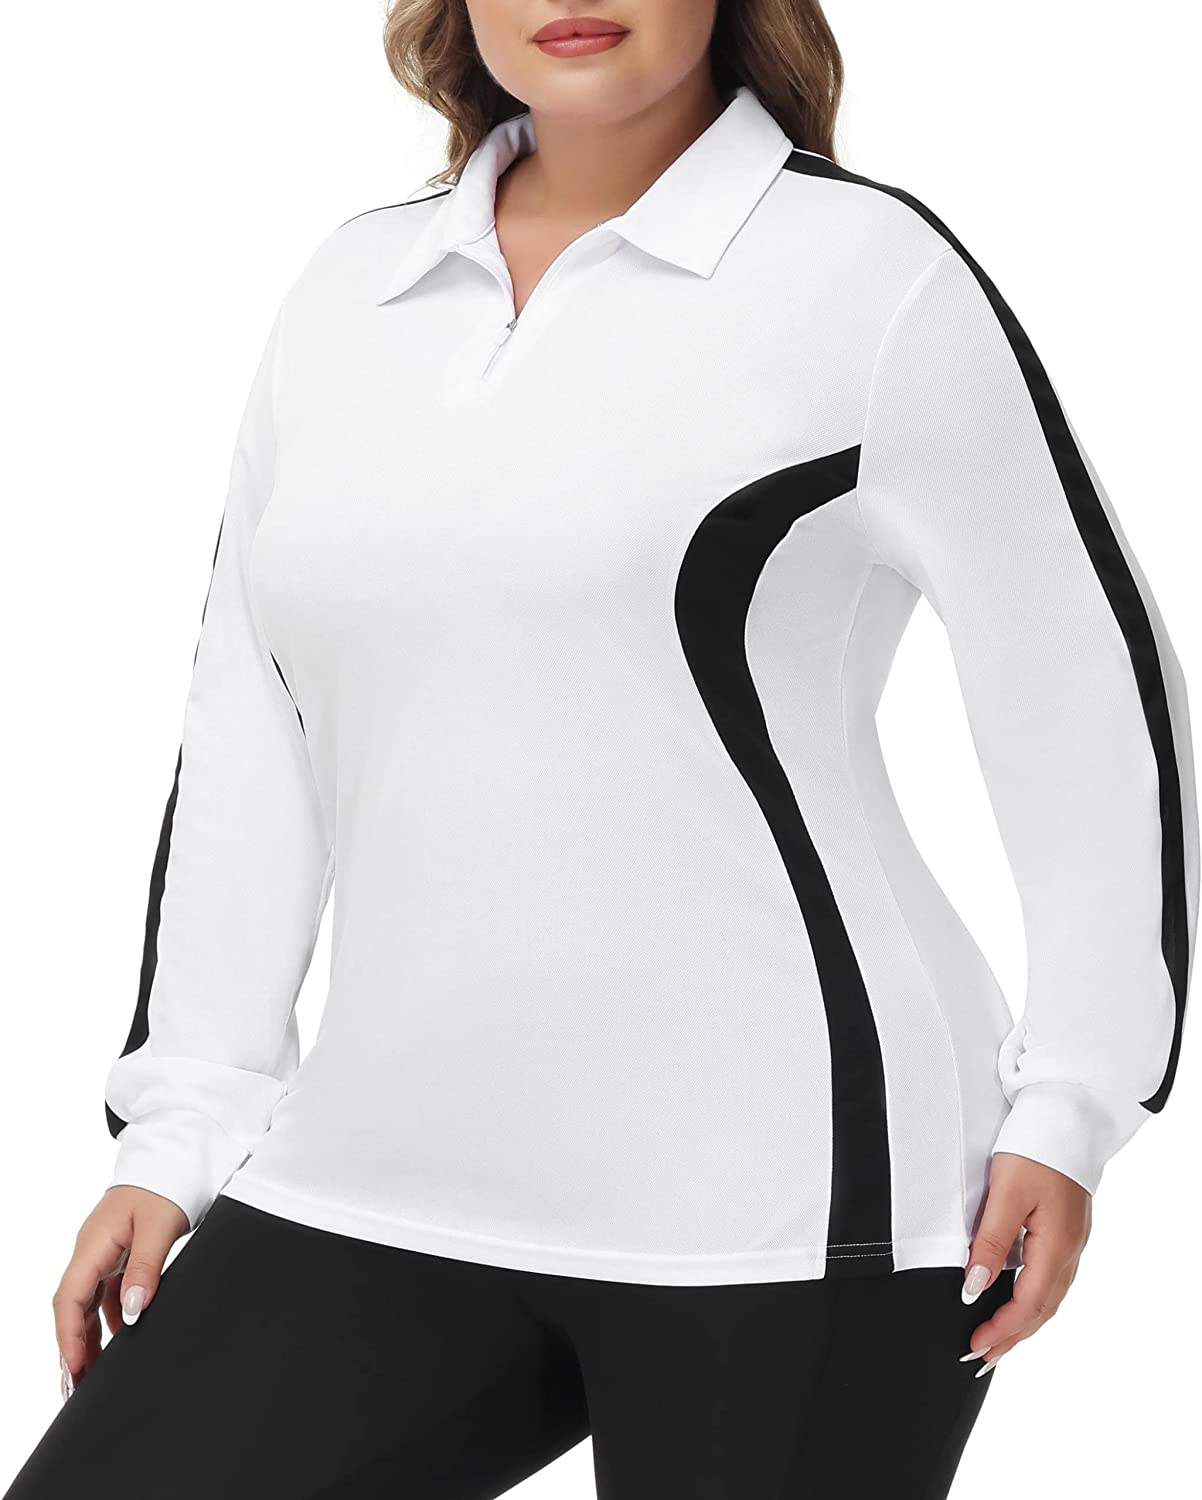 Women's Plus Size Long Sleeve Golf Polo Shirts Lightweight Dry Fit